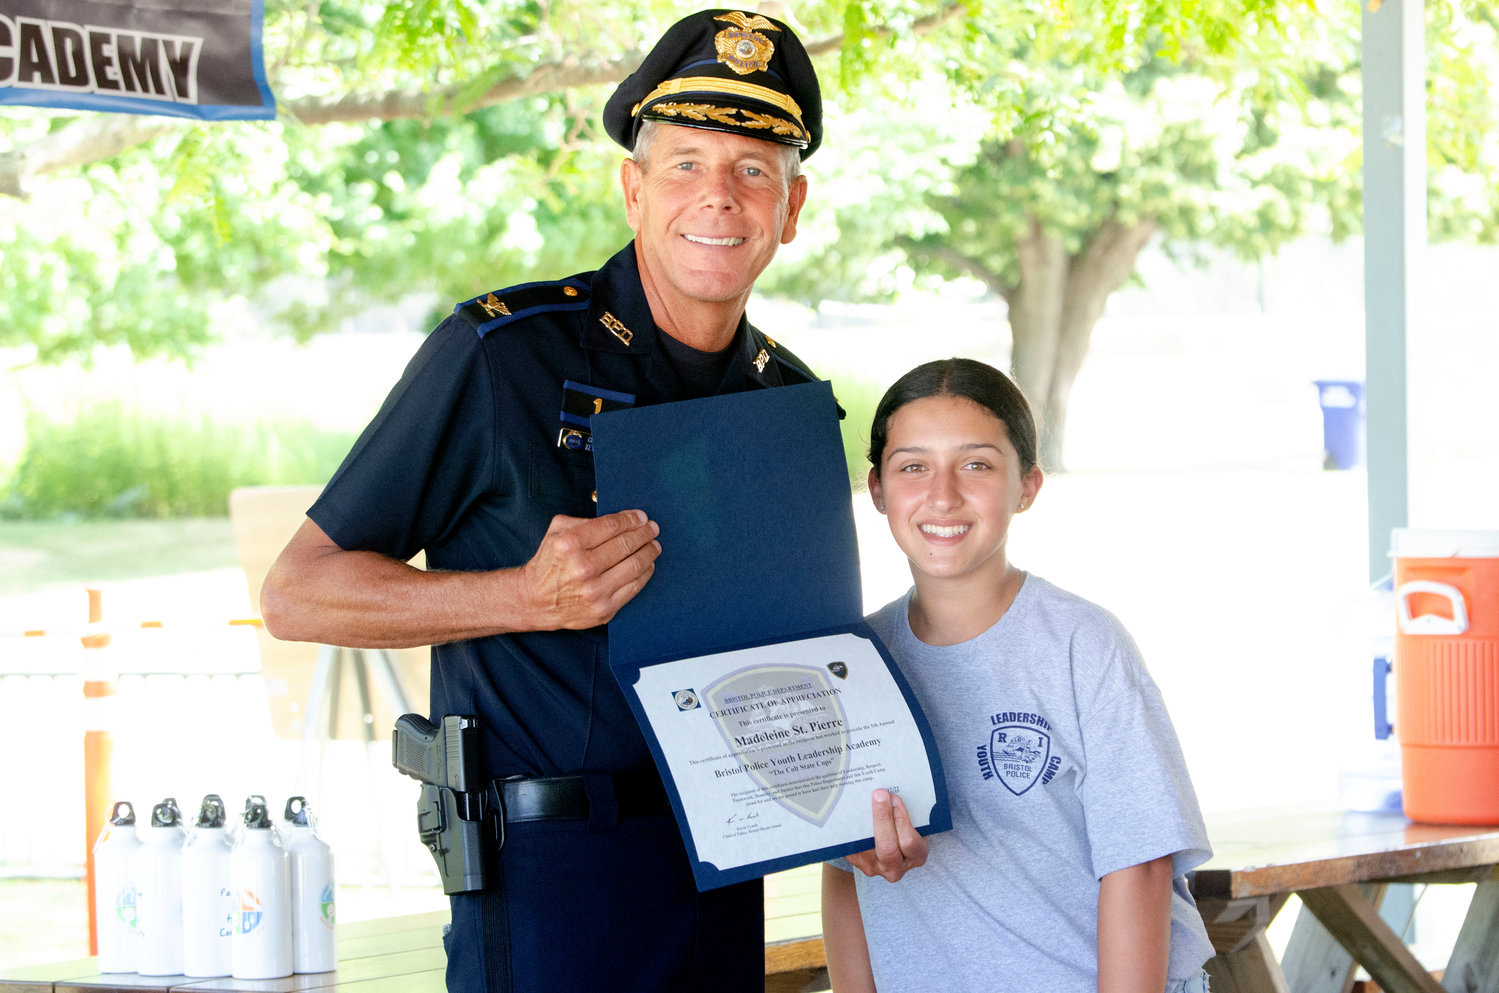 Bristol Police Chief Kevin Lynch and Madeleine St. Pierre take a photo after she received a certificate for passing the leadership academy at the town beach on Friday.